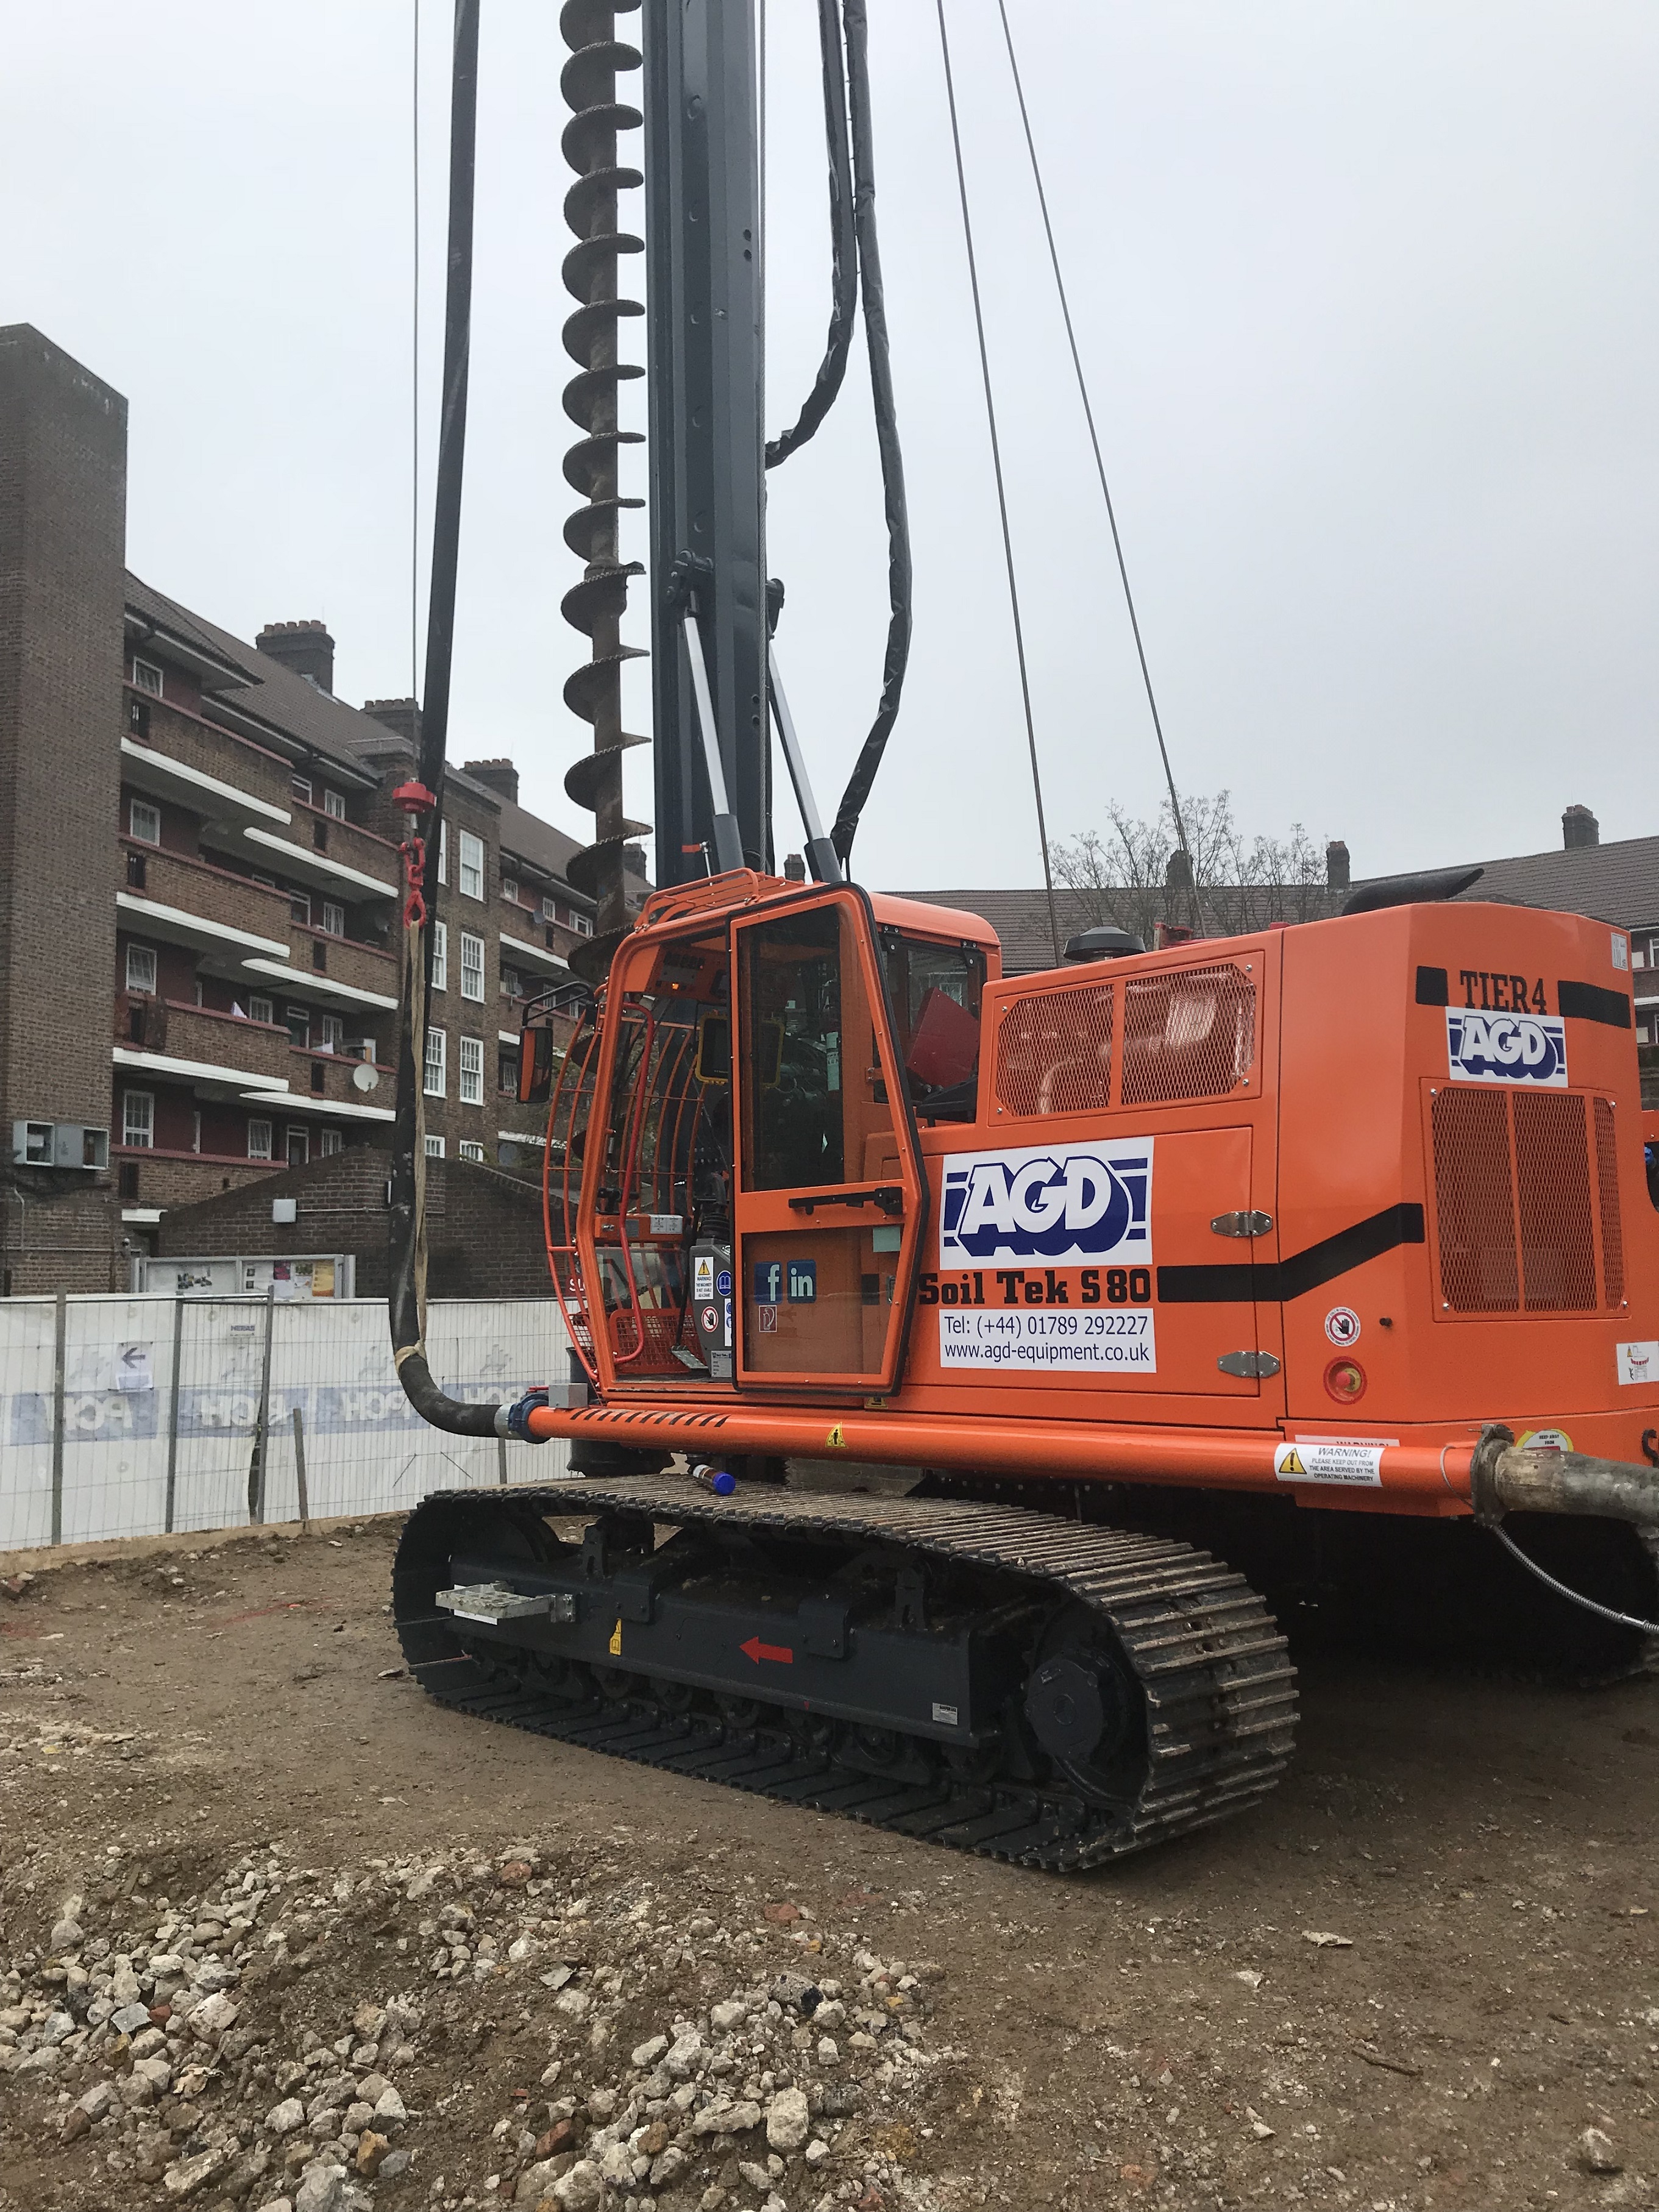 Soiltek S80 compact CFA piling rig for hire